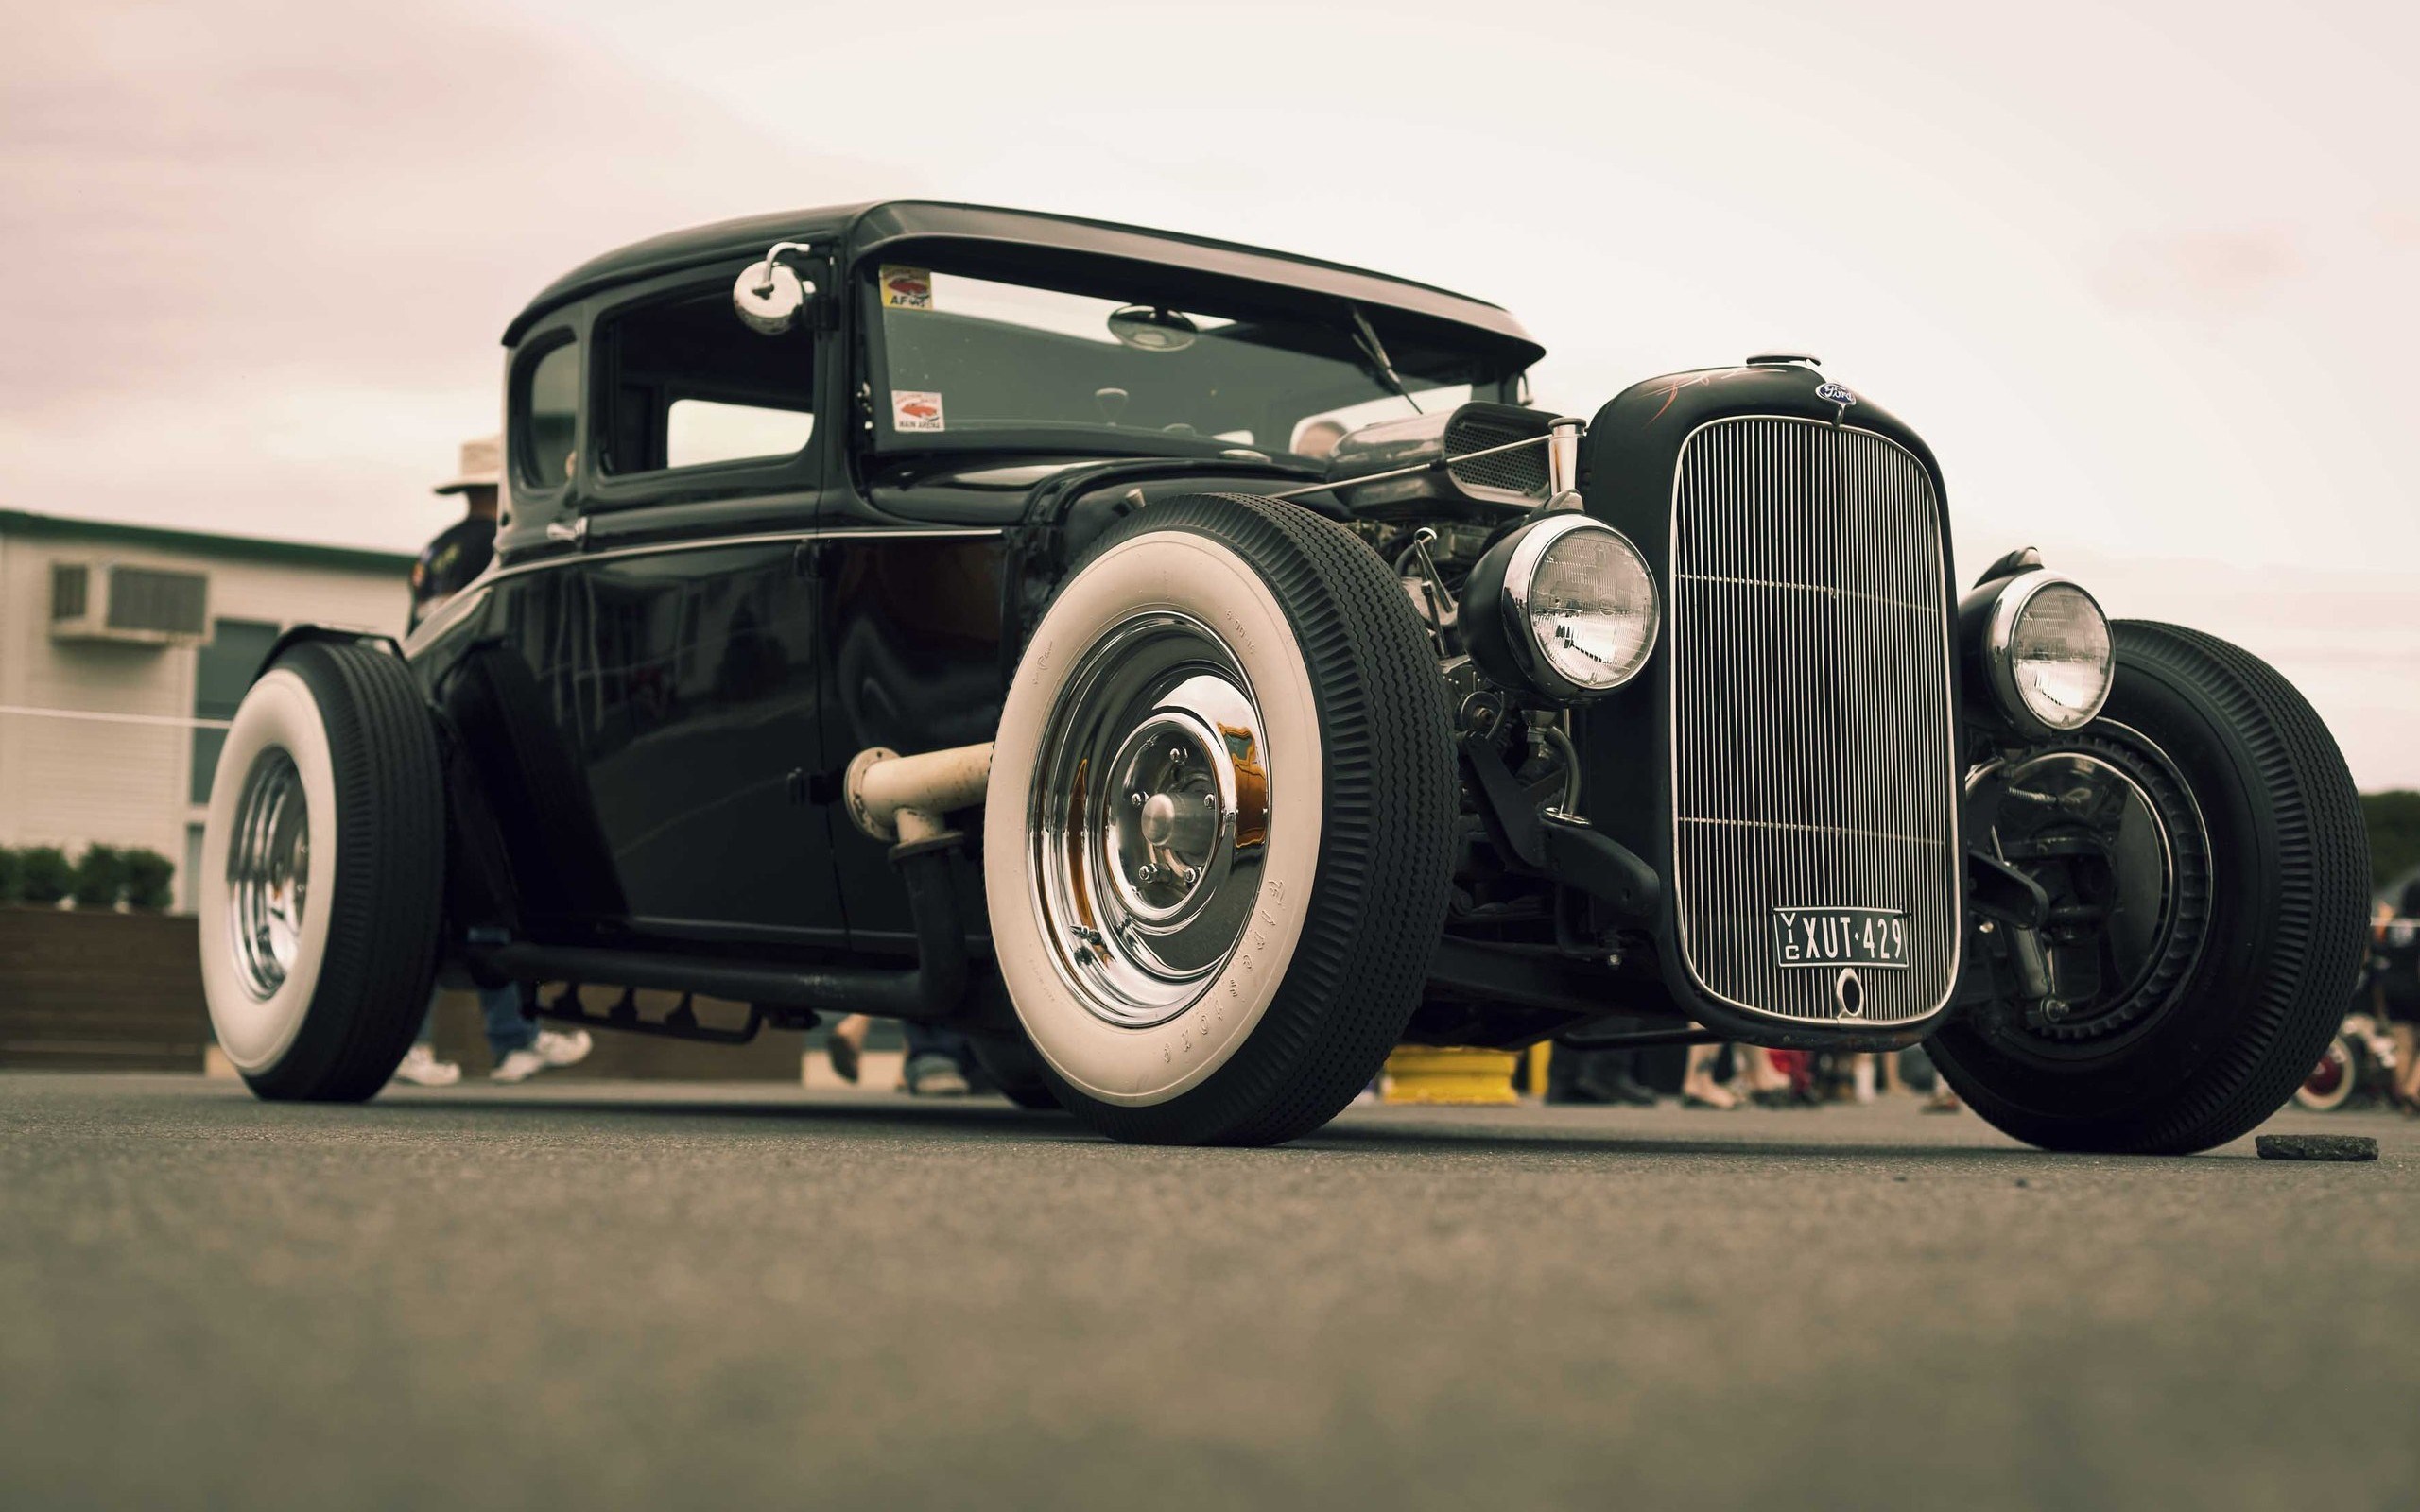 Hot Rod Cars Wallpaper For Android - Ndemok.com